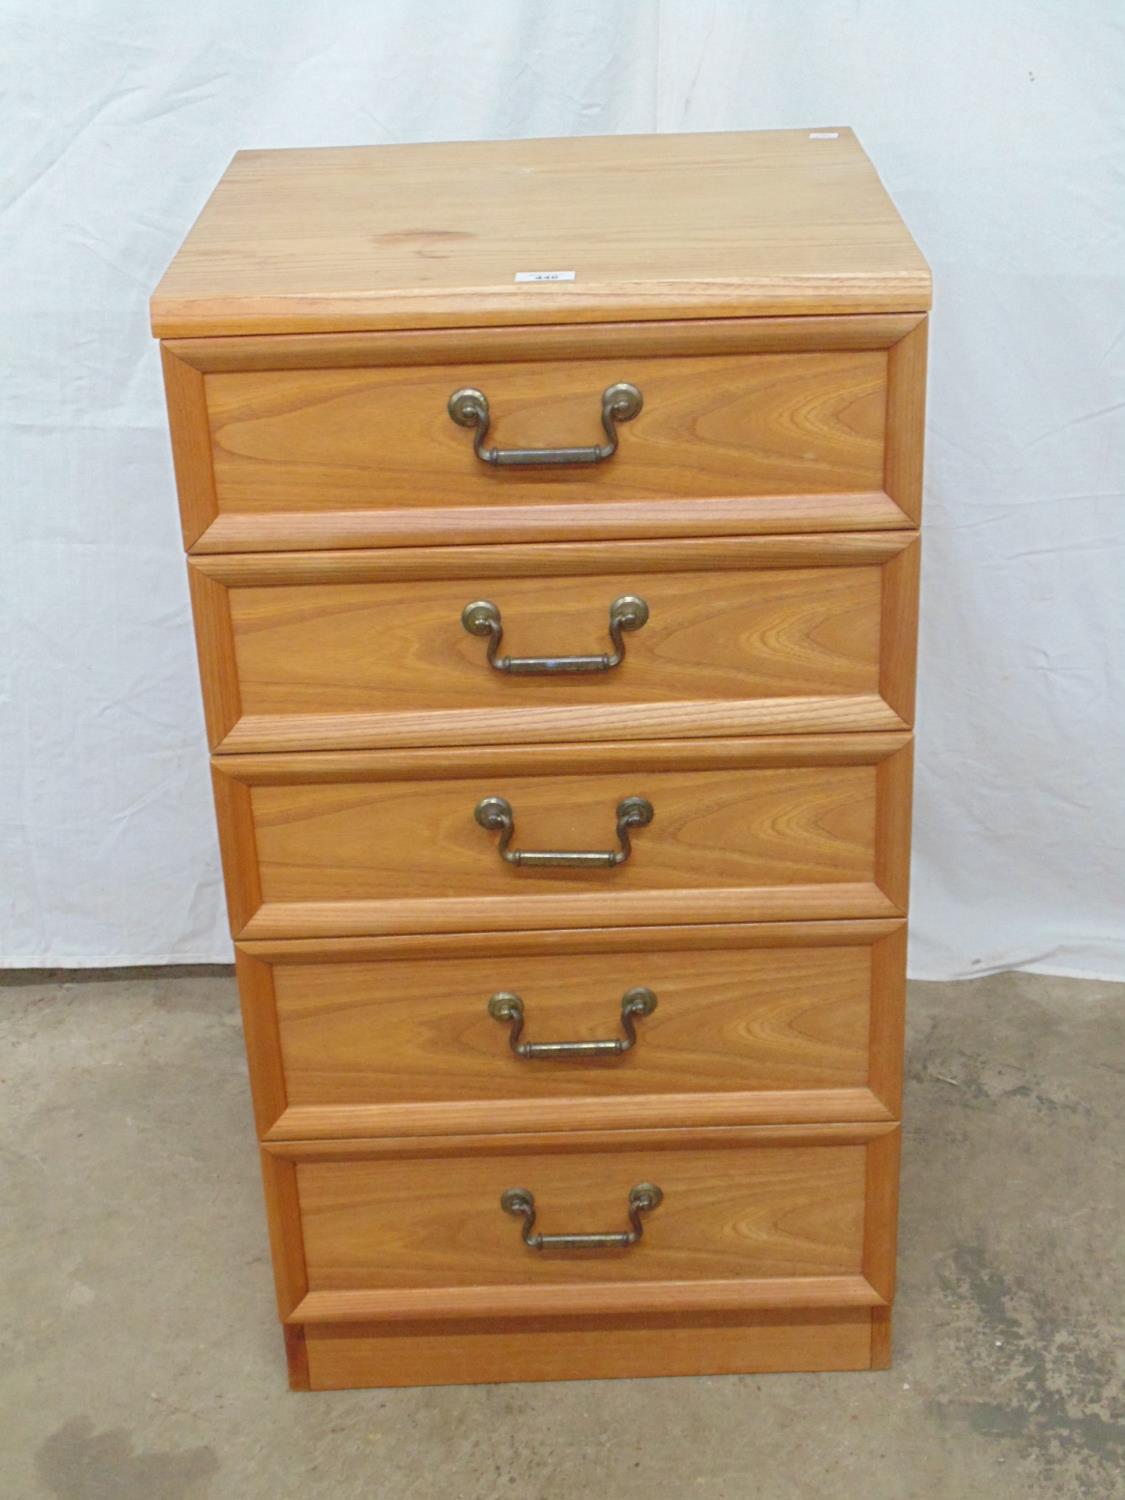 G-Plan chest of five drawers, standing on a plinth base - 51cm x 46cm x 94cm tall (damage to top